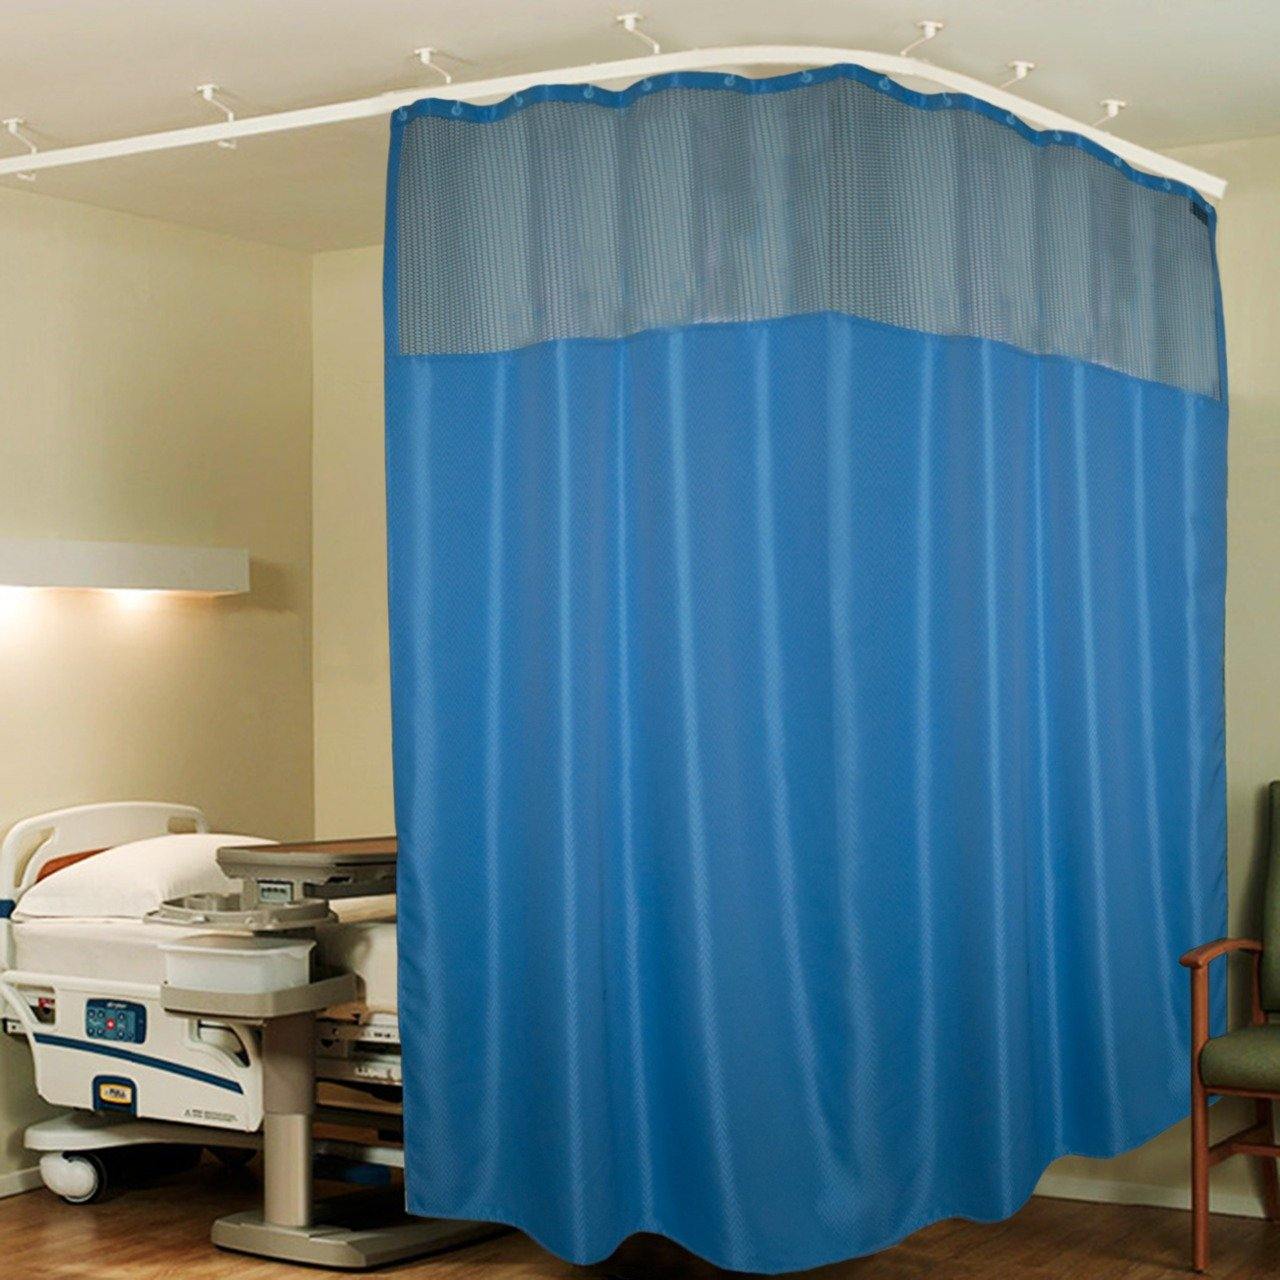 Lushomes Dark Blue Full Sized Hospital ICU Bed Zig Zag Curtain with 16 Eyelets and 16 C-Hooks and Net (8Ft x 7Ft, 2 Panels Attached) - Lushomes